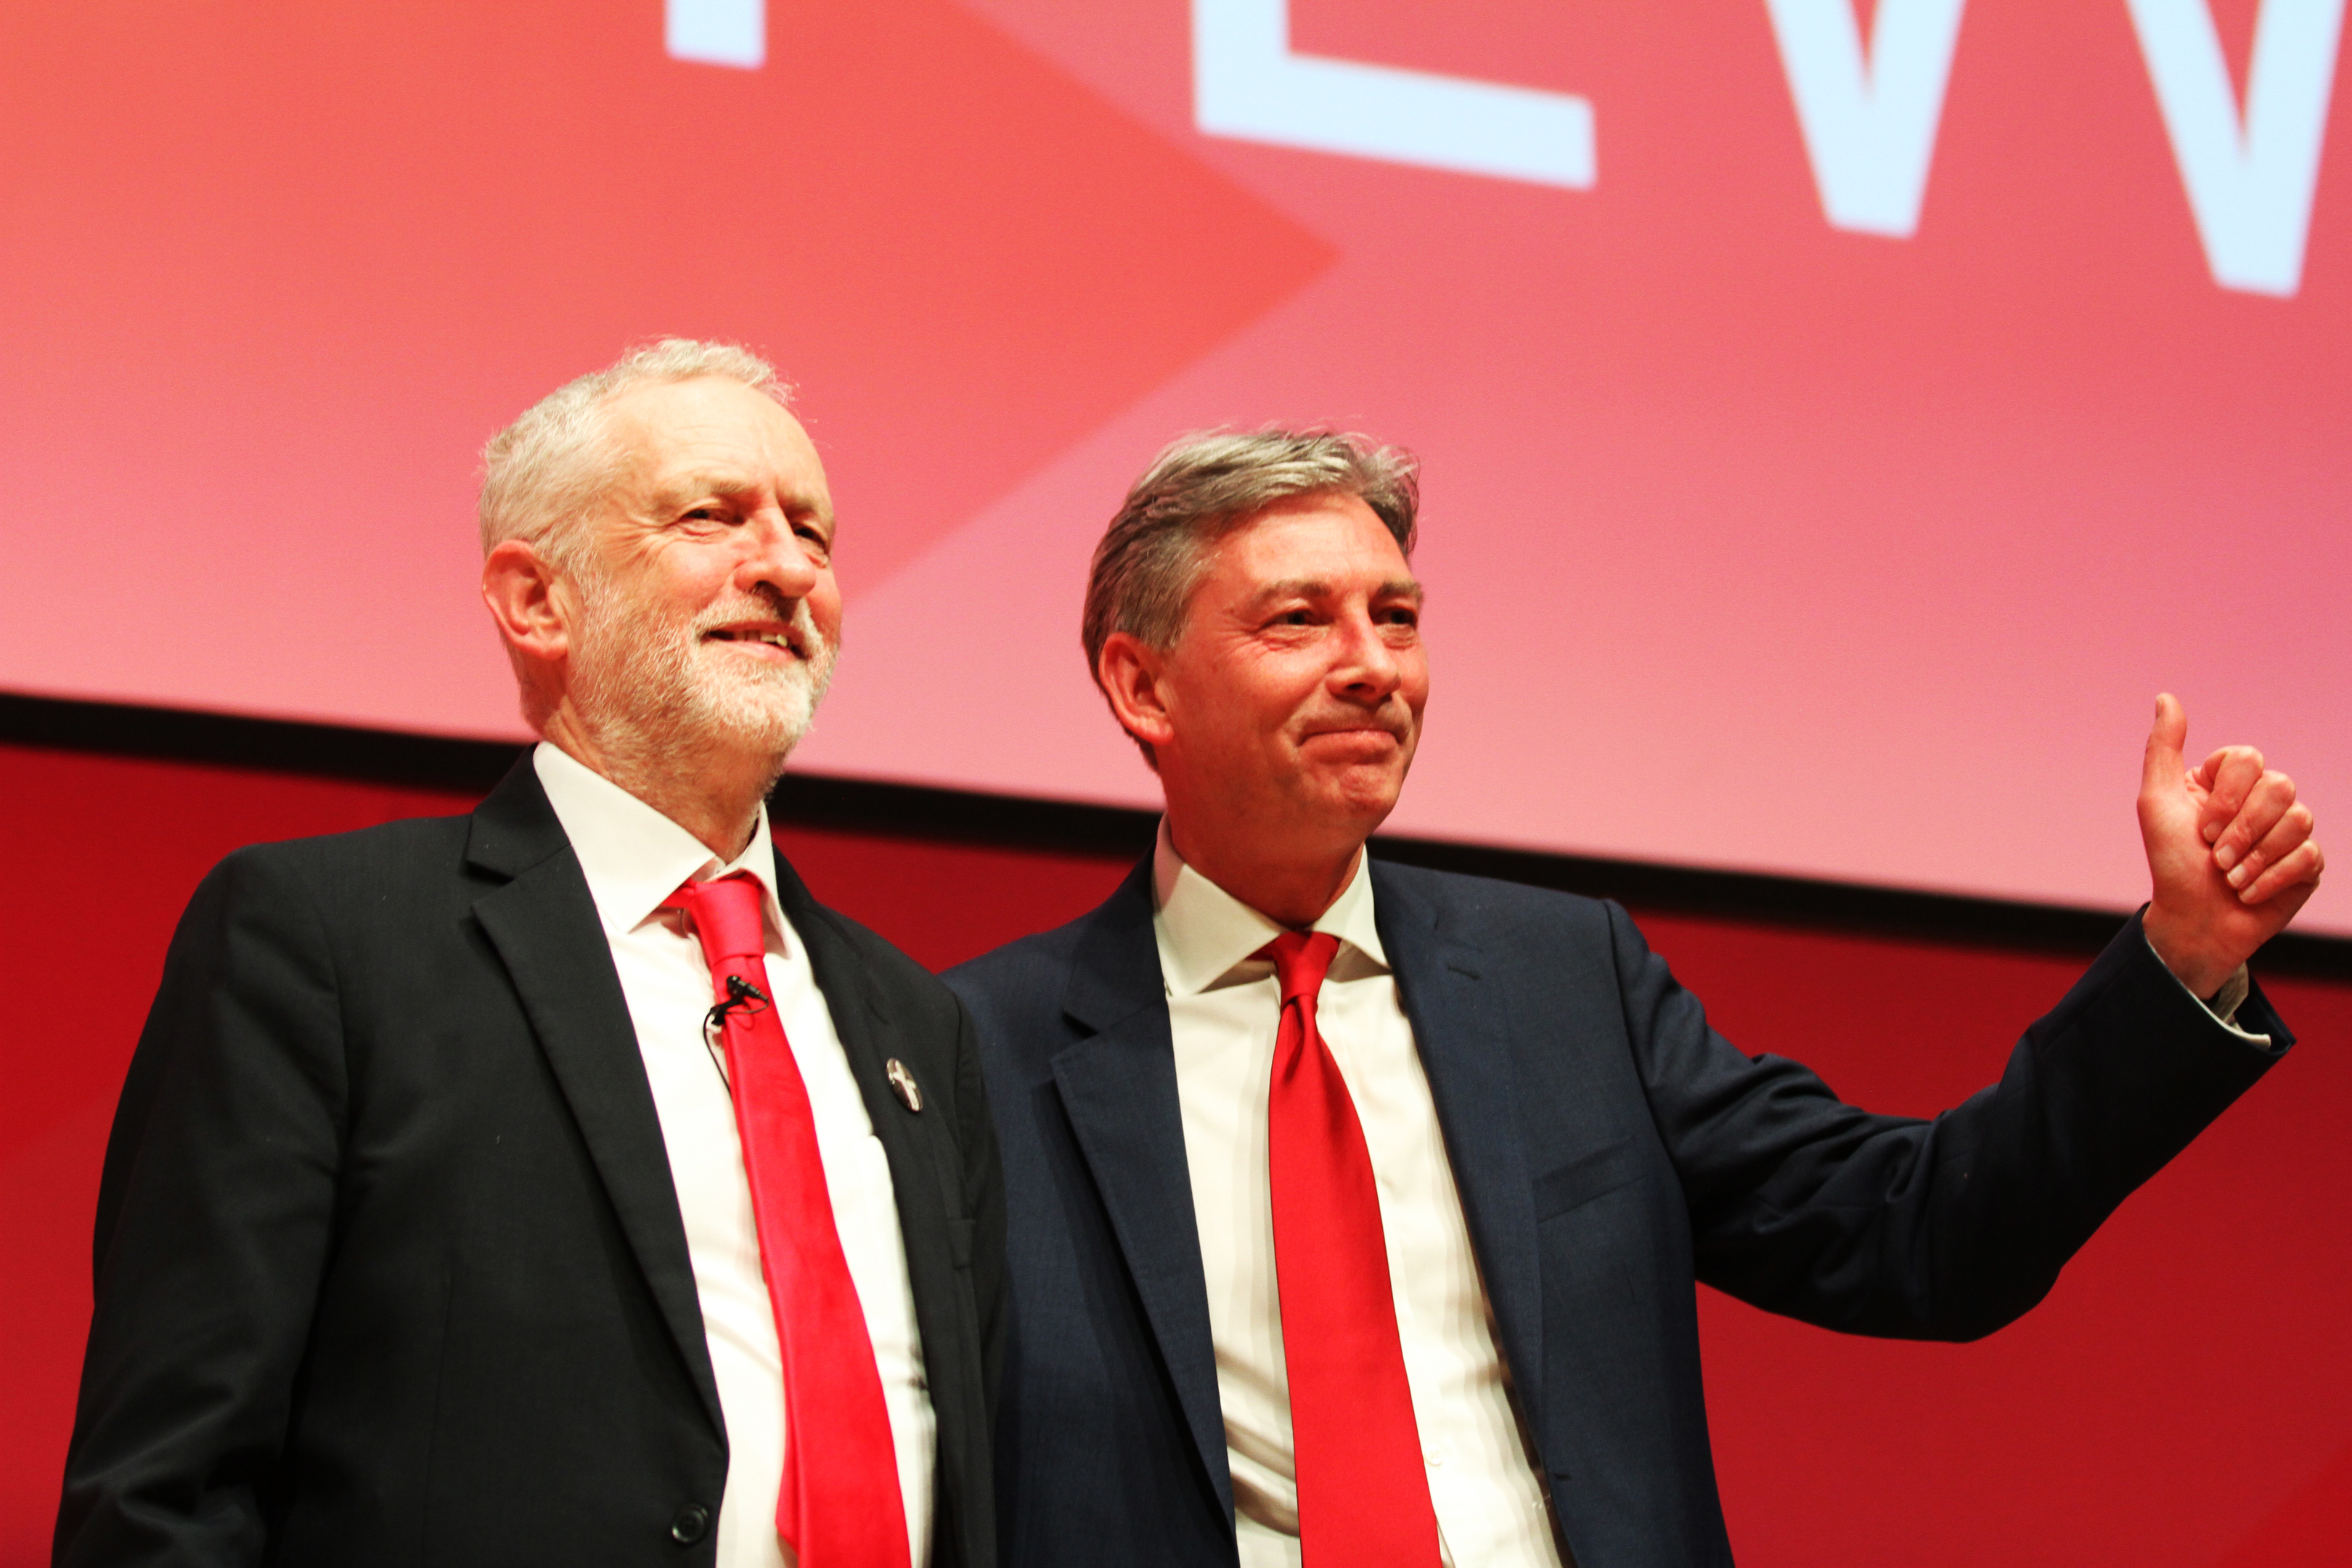 Leaders of the Labour Party Jeremy Corbyn and Richard Leonard. (Mhairi Edwards/Courier)